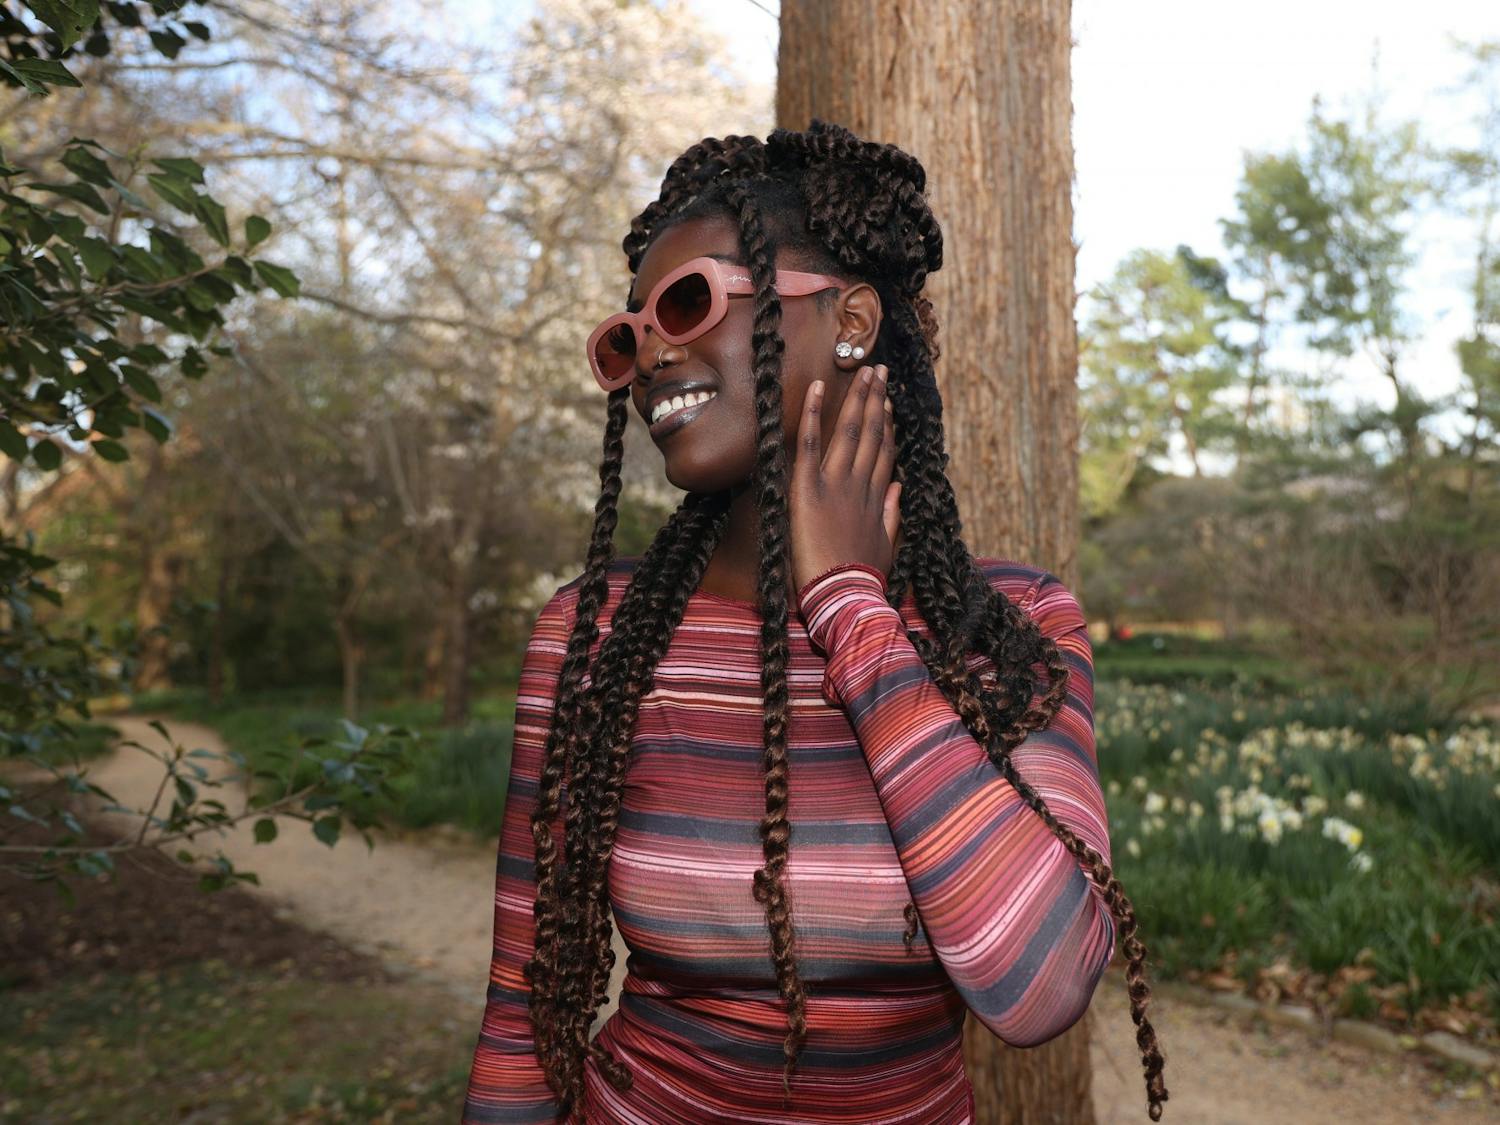 UNC sophomore Jaziah Planter shows off her pink sunglasses and outfit in Coker Arboretum on Friday, March 20, 2023.